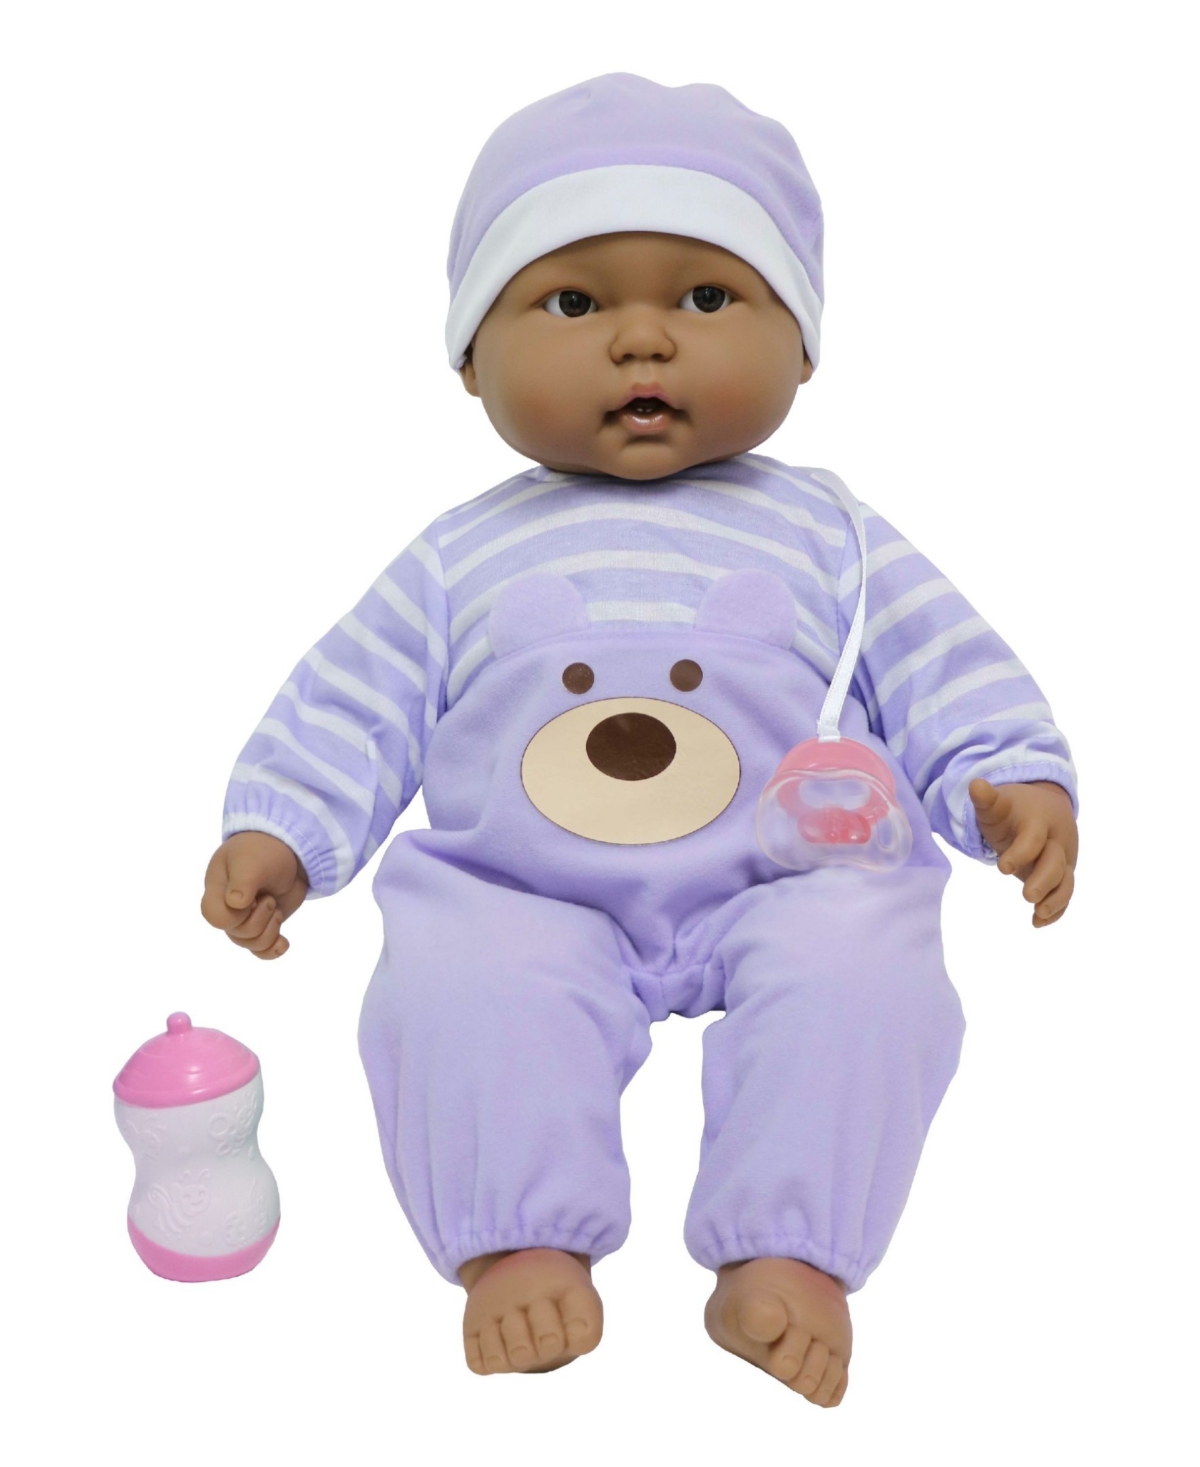 Jc Toys Lots To Cuddle Babies 20" Hispanic Baby Doll Purple Outfit In Purple - Hispanic